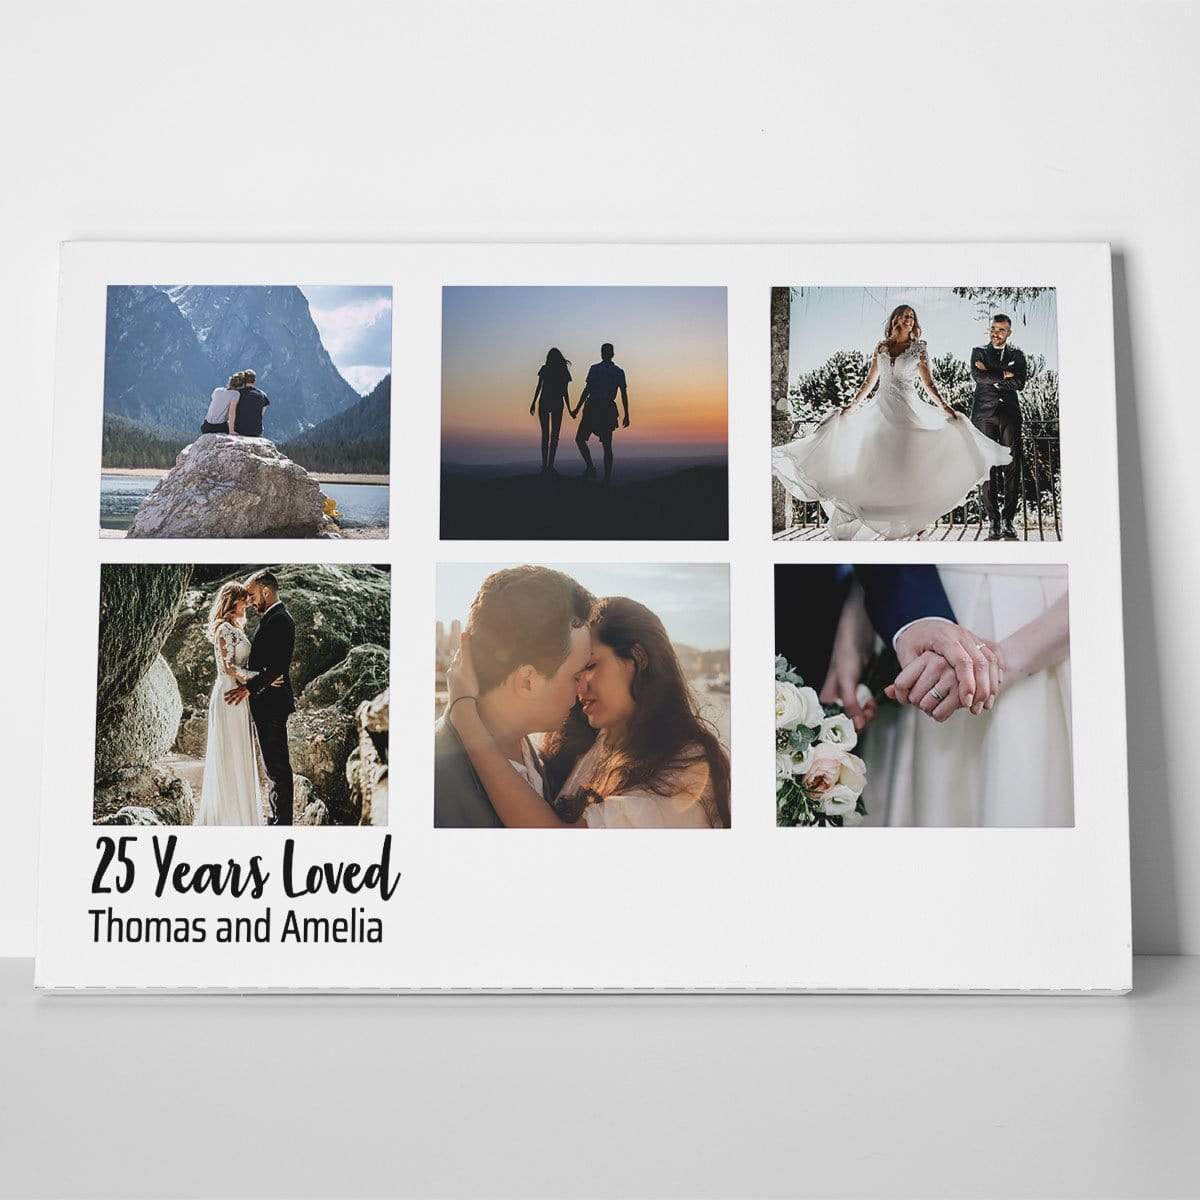 Years Loved Photo Canvas Print